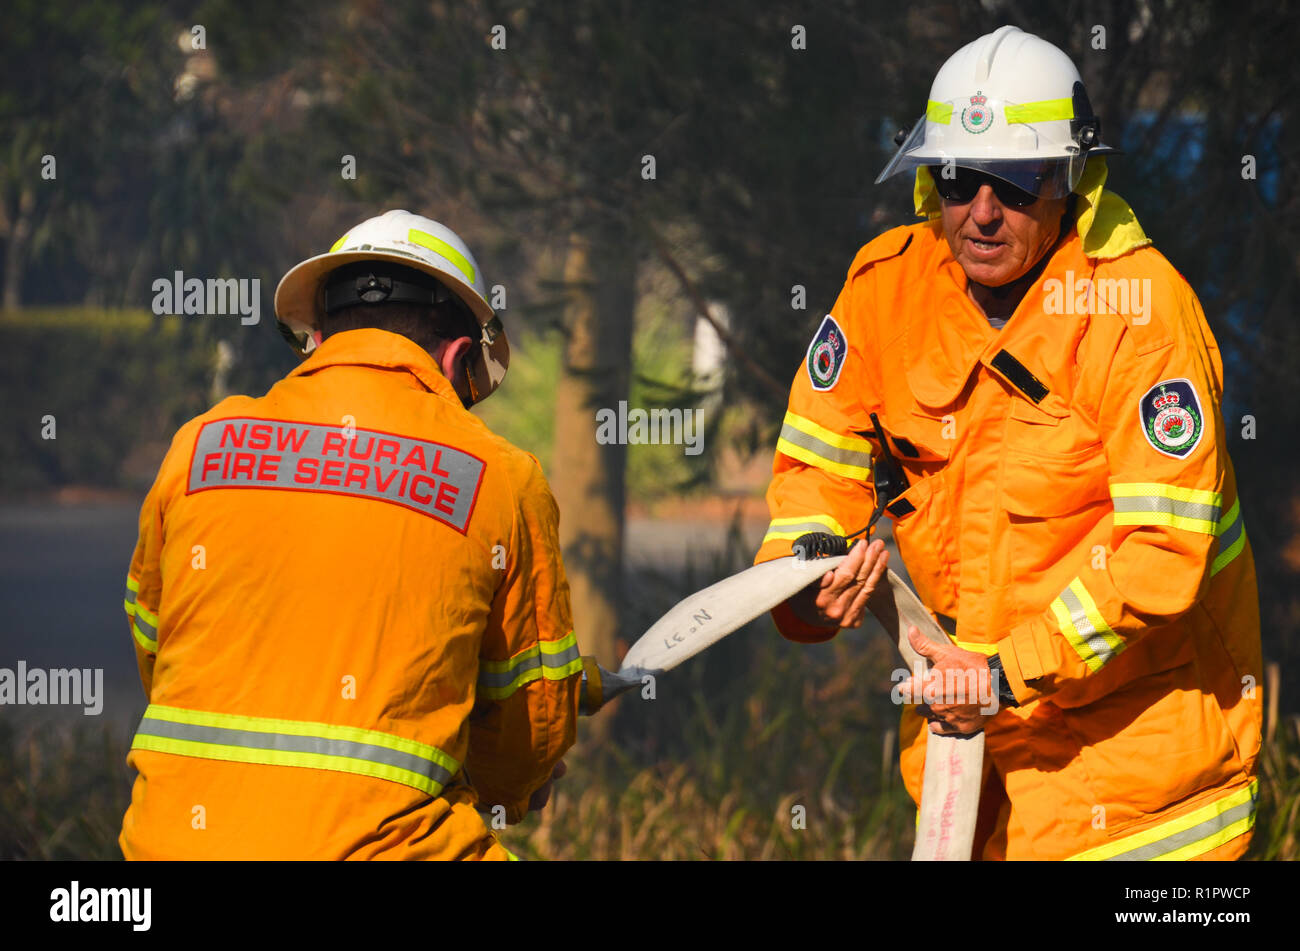 Volunteer firefighters from St Georges Basin work to connect the hose at a vehicle fire at Vincentia, NSW, Australia - 12 Dec 2017. Stock Photo